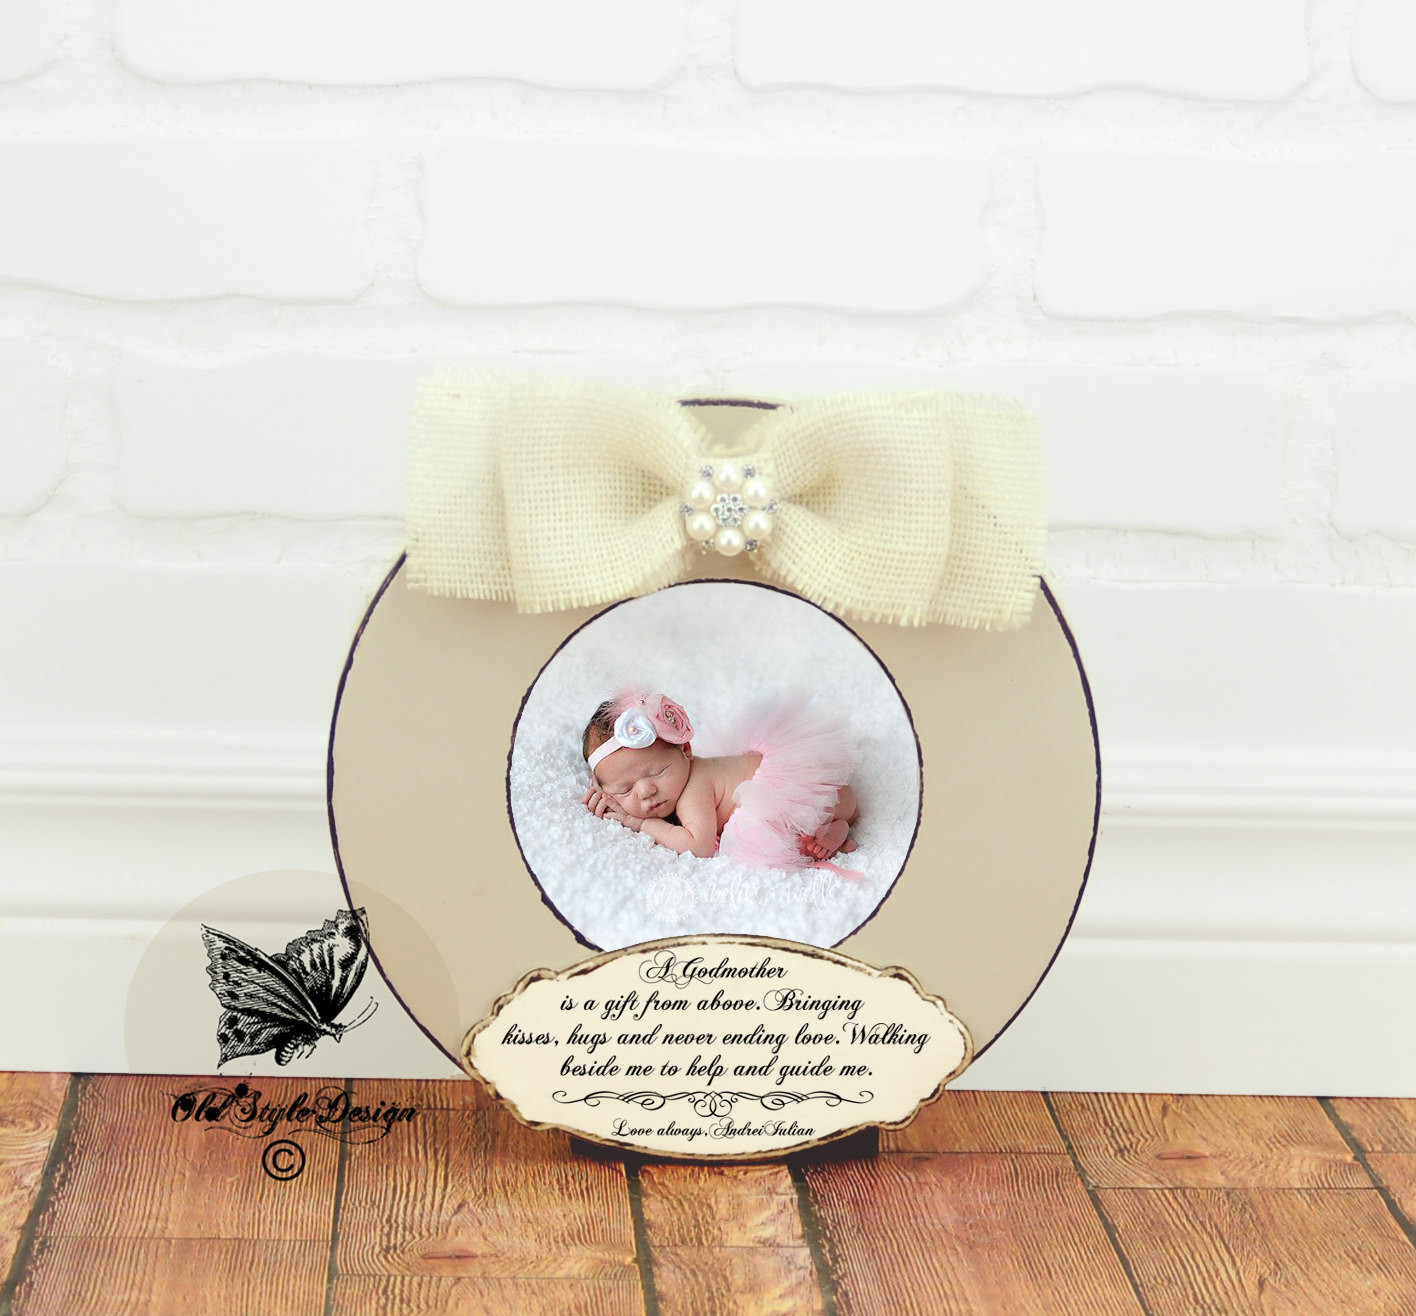 Baptism Gift Ideas From Godmother
 Godmother Gift Godparent Gift Baptism Gift by